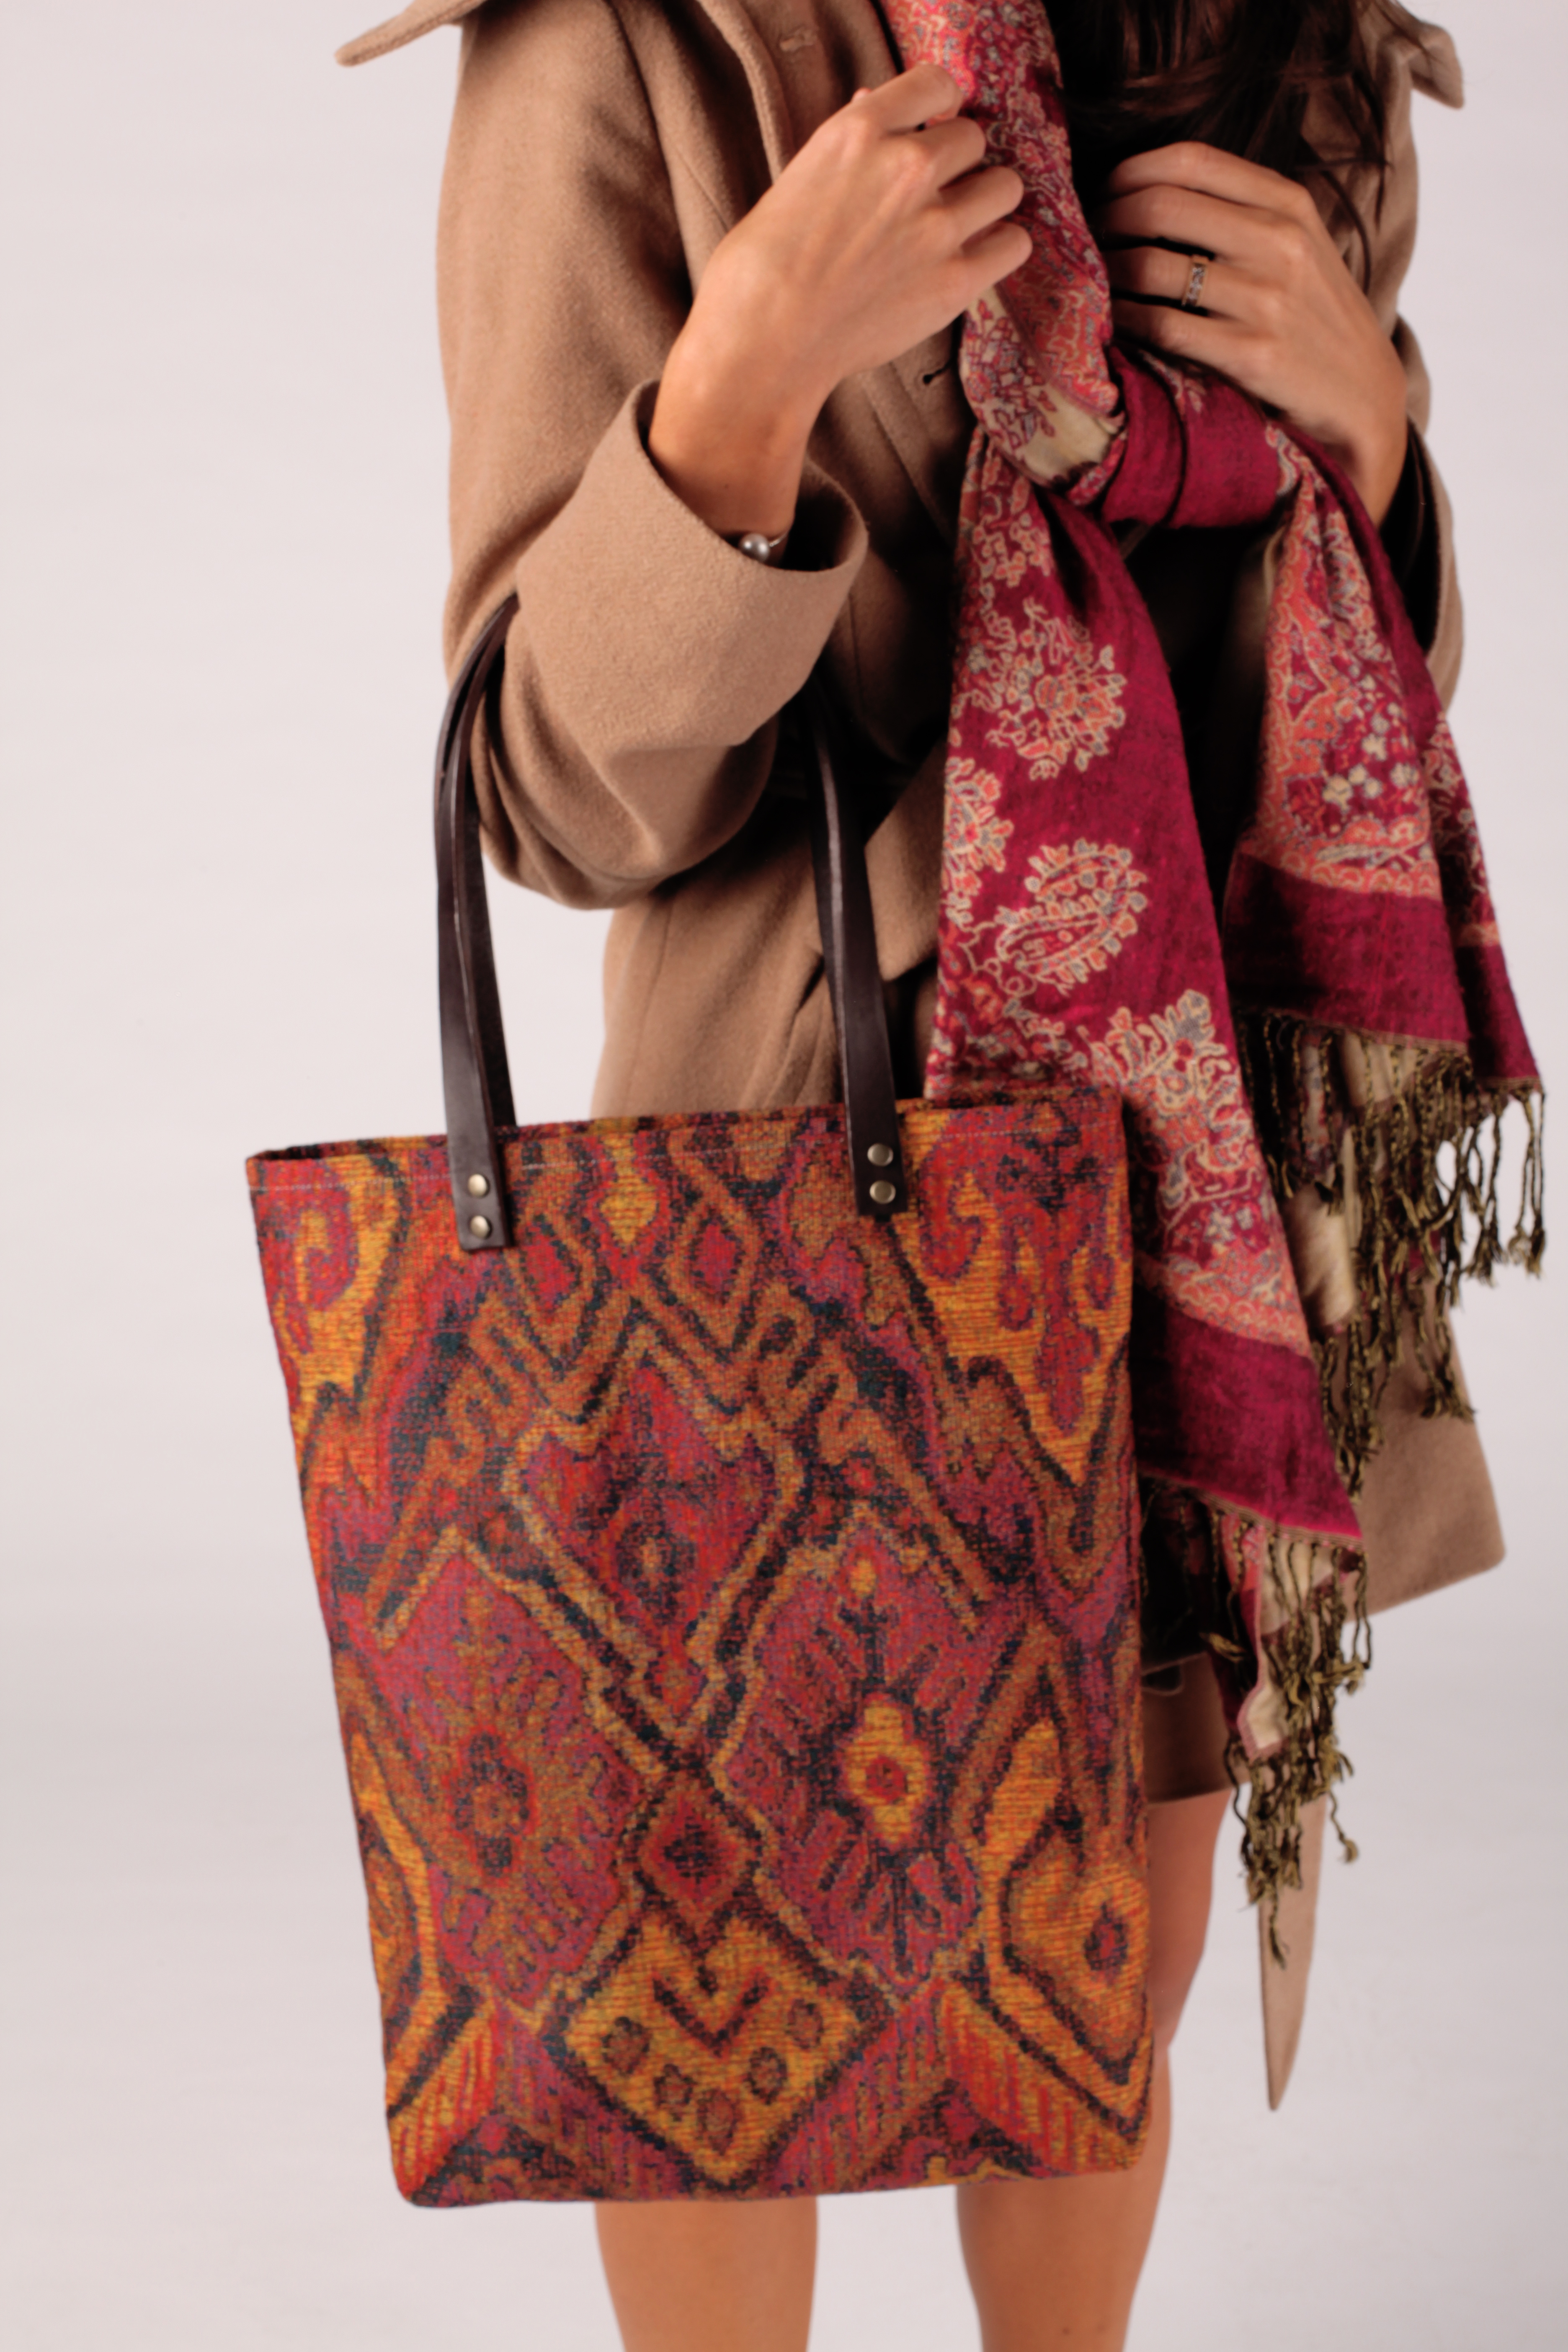 Kilim Canvas Tote Bag with Genuine Leather Straps – Sewing Projects | www.waterandnature.org